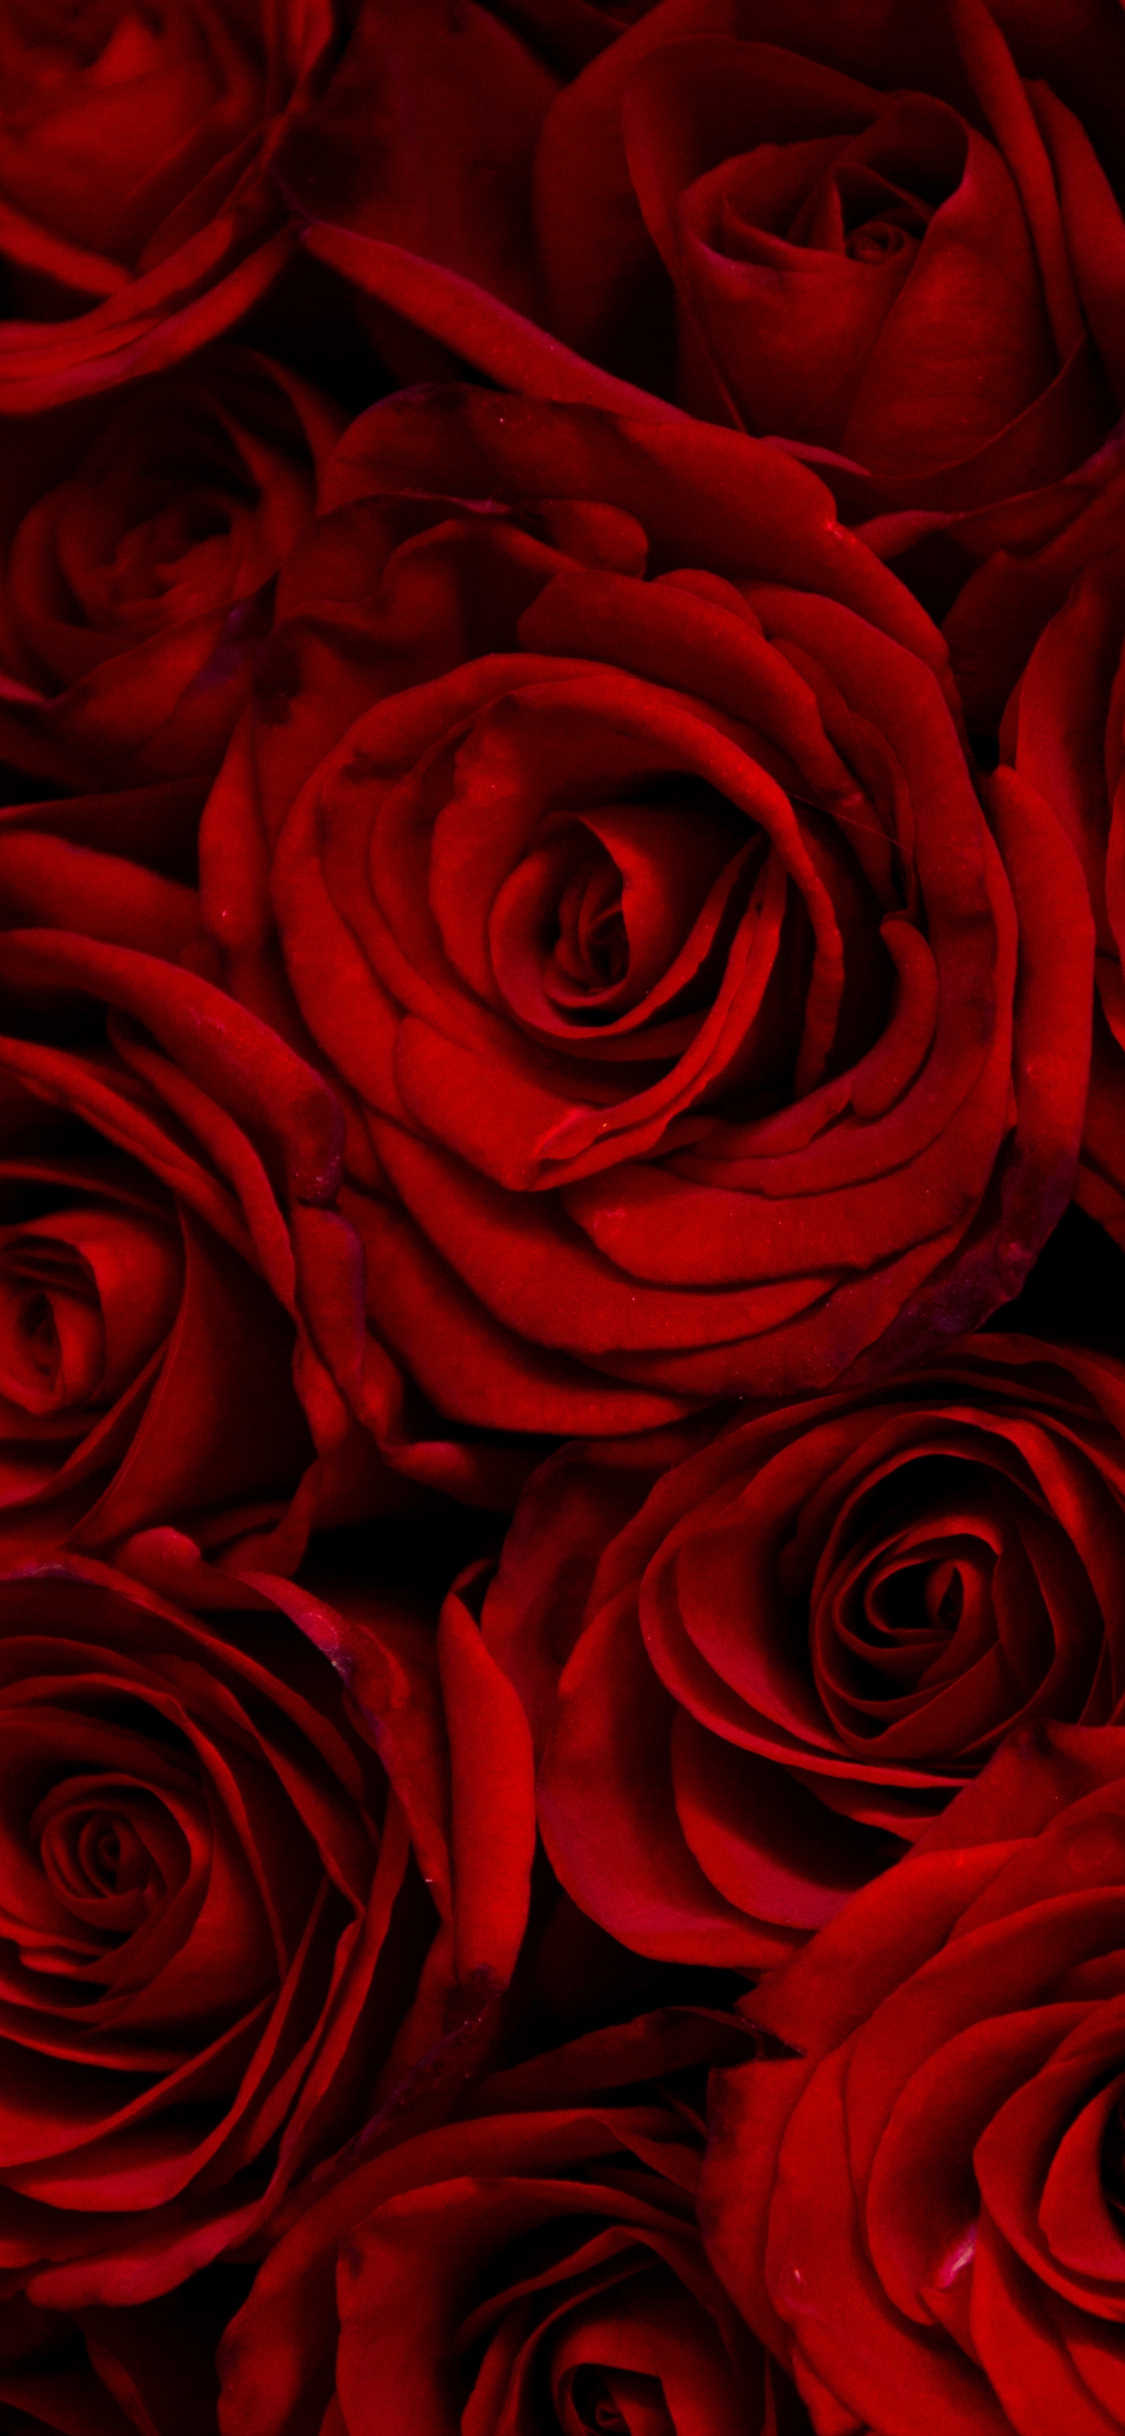 Download dark, red roses, decorative 1125x2436 wallpaper, iphone x, 1125x2436 HD image, background, 9700